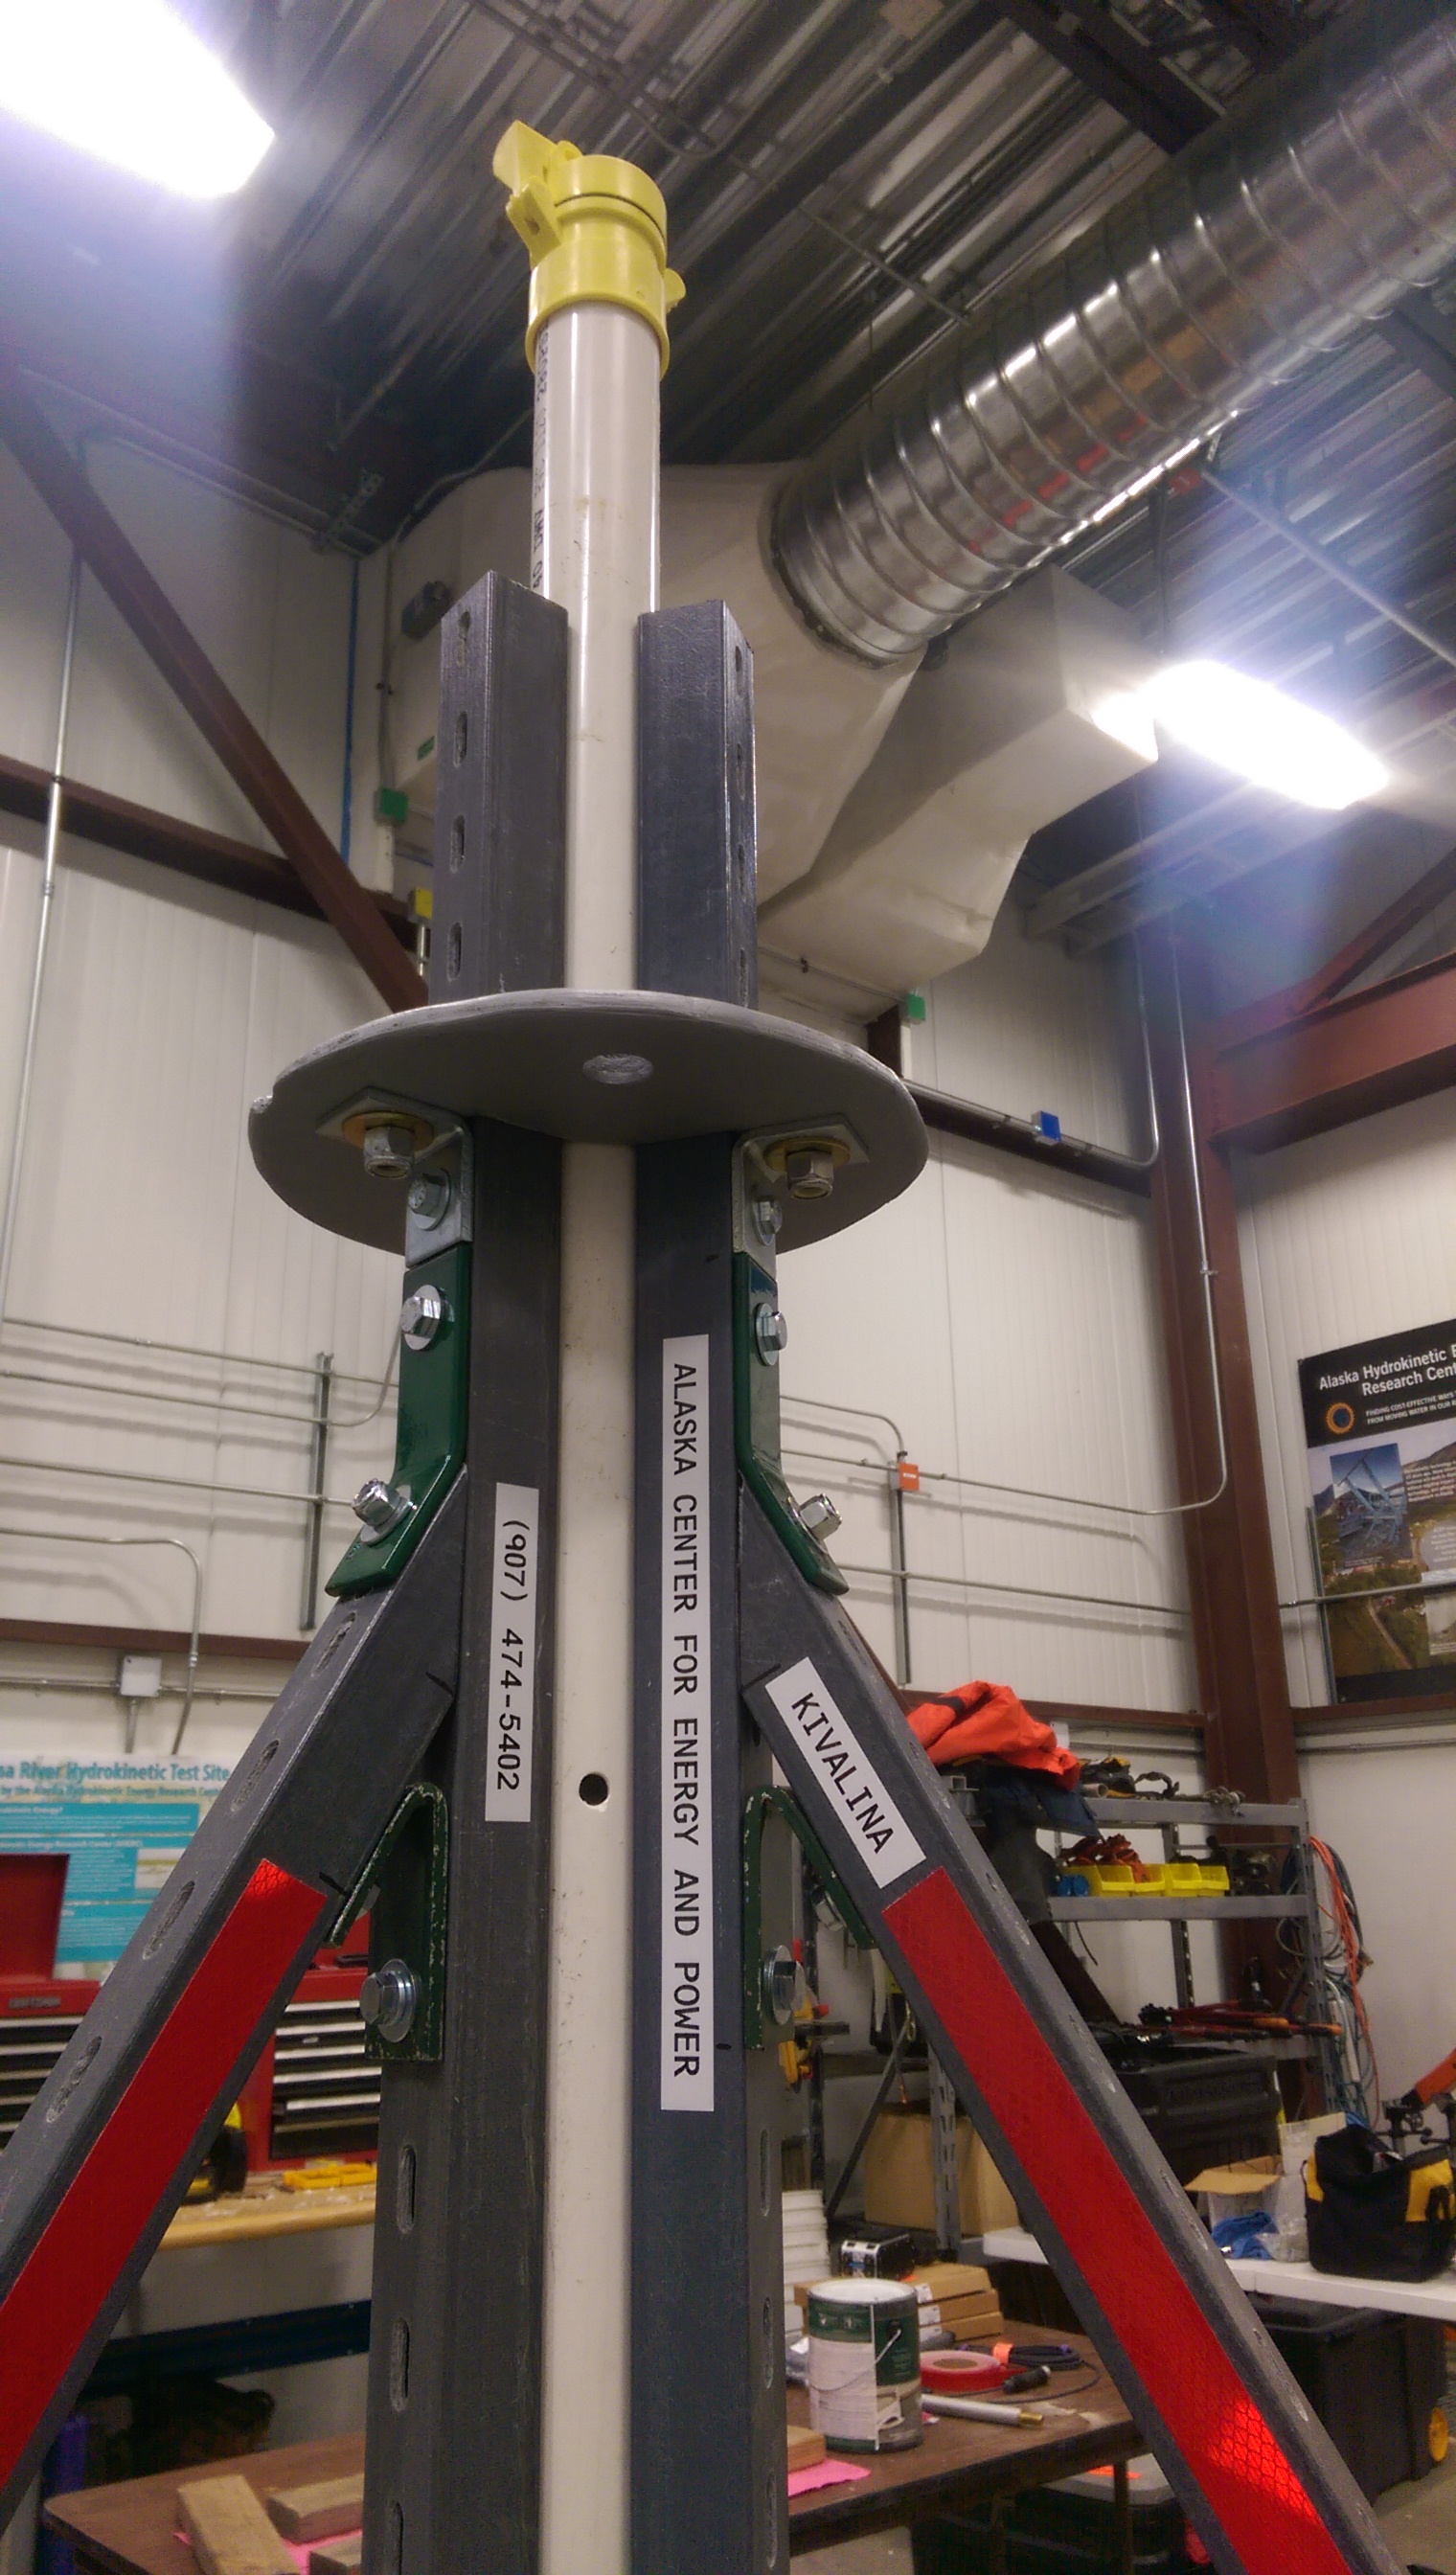 AHERC Developed Ocean Storm Surge Water Level Mounting System to be Deployed in Three Alaska Communities